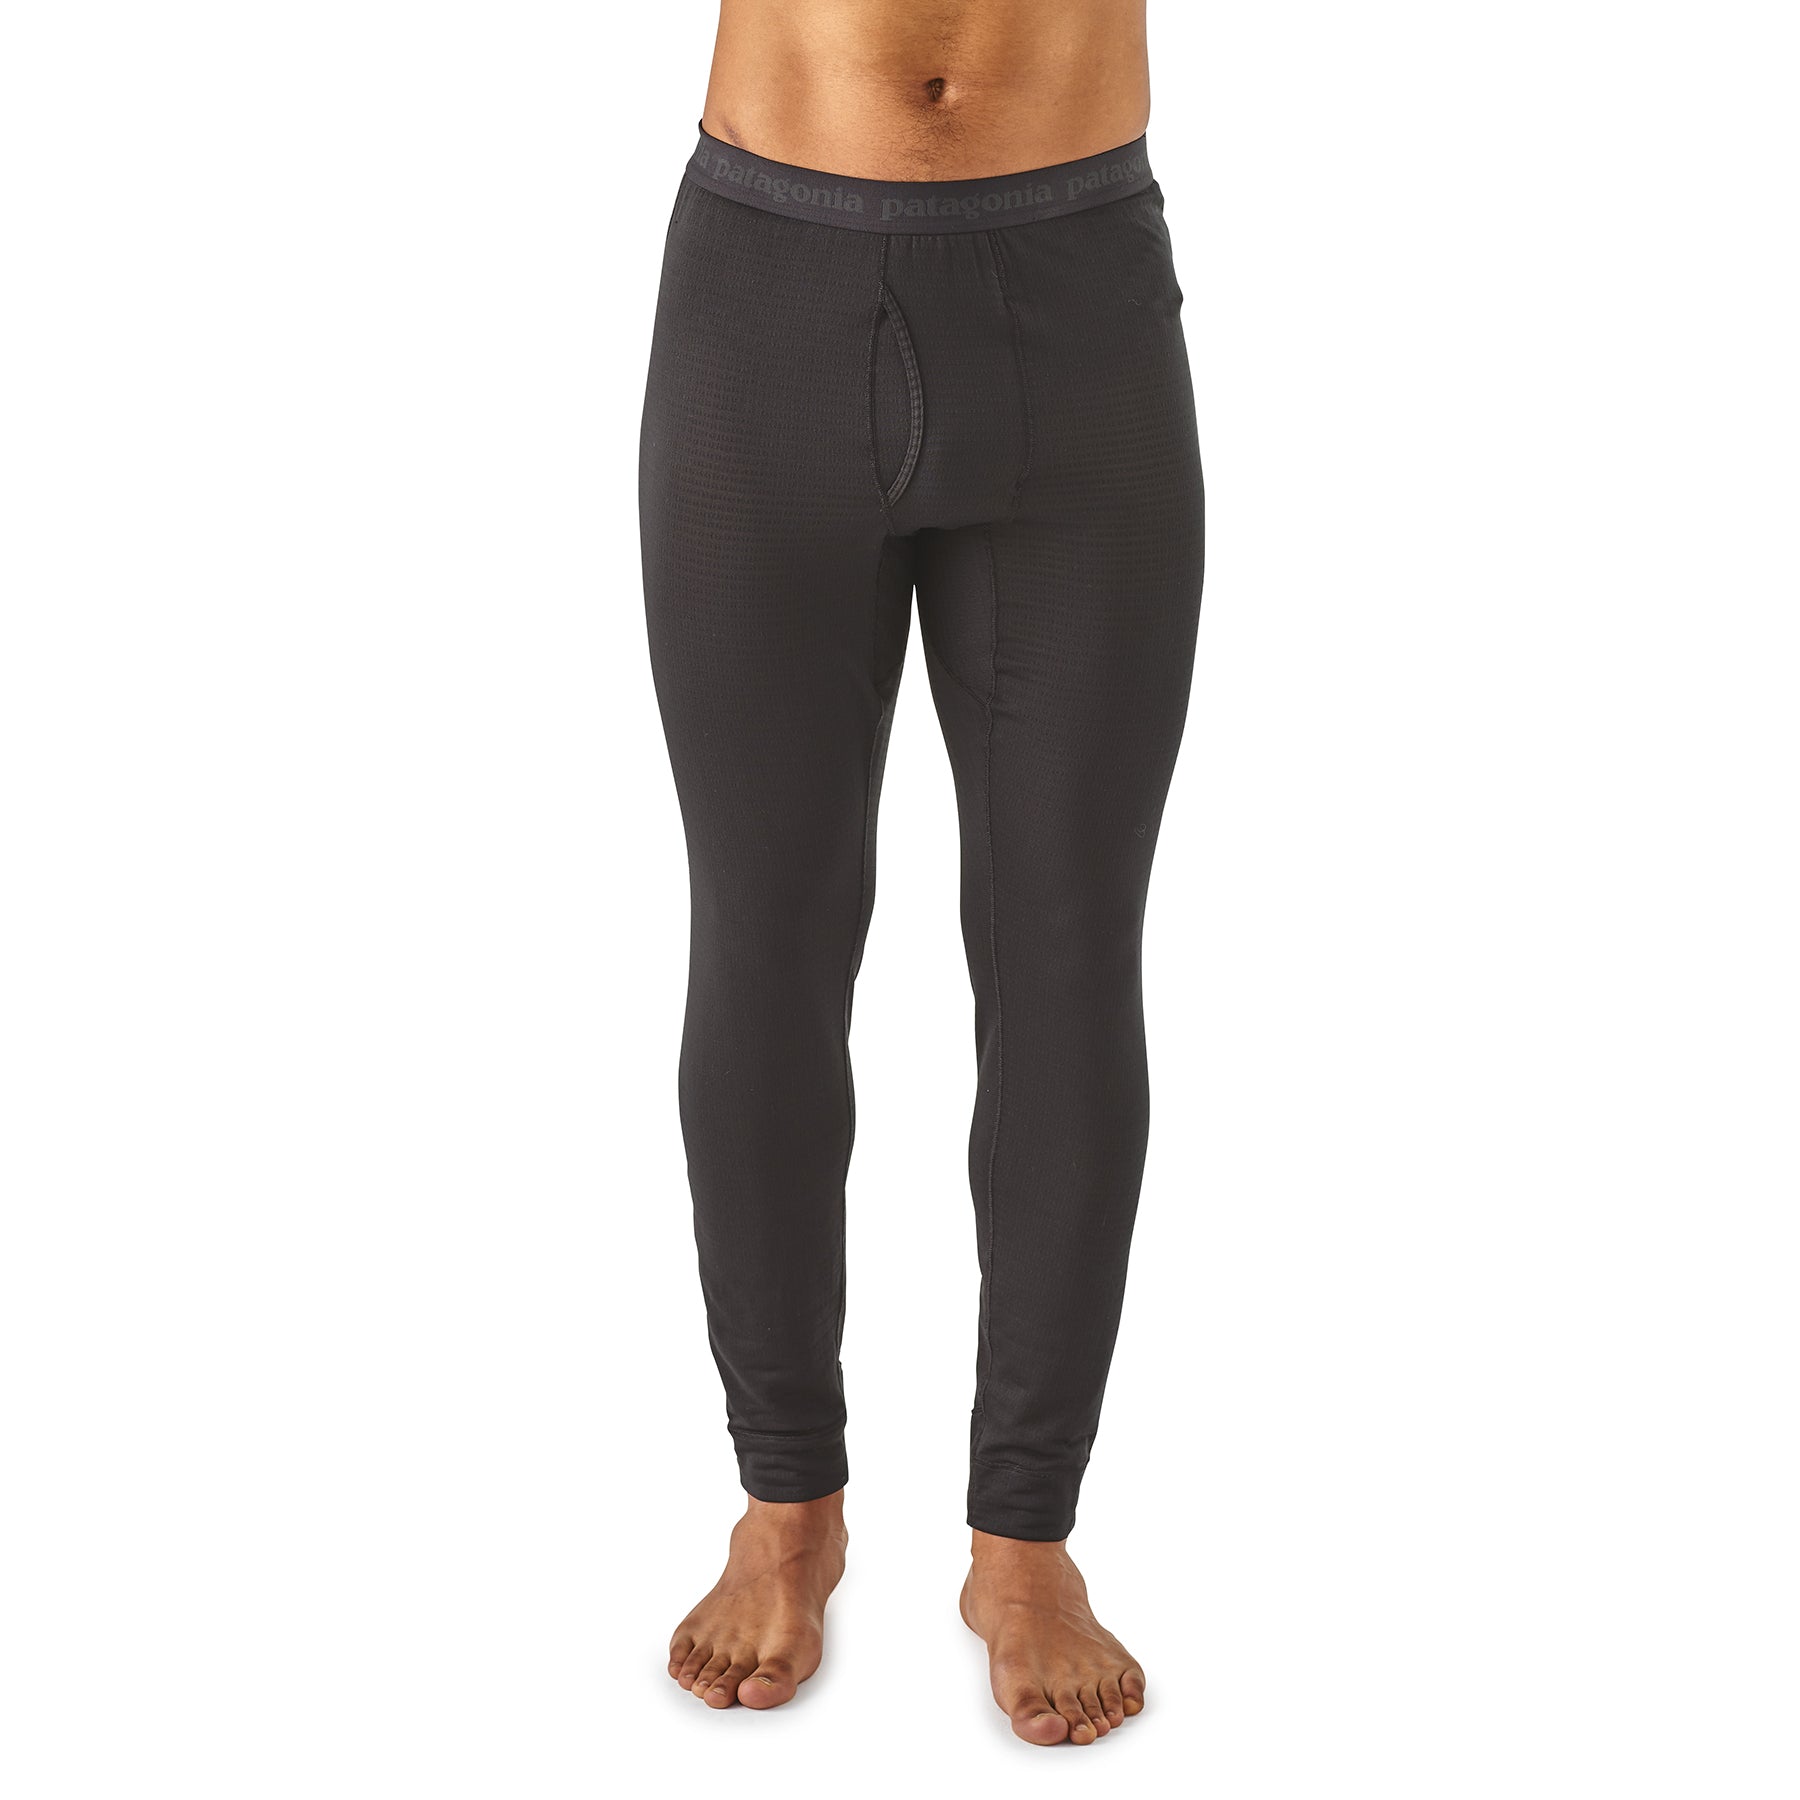 Patagonia M's Capilene Thermal Weight Bottoms